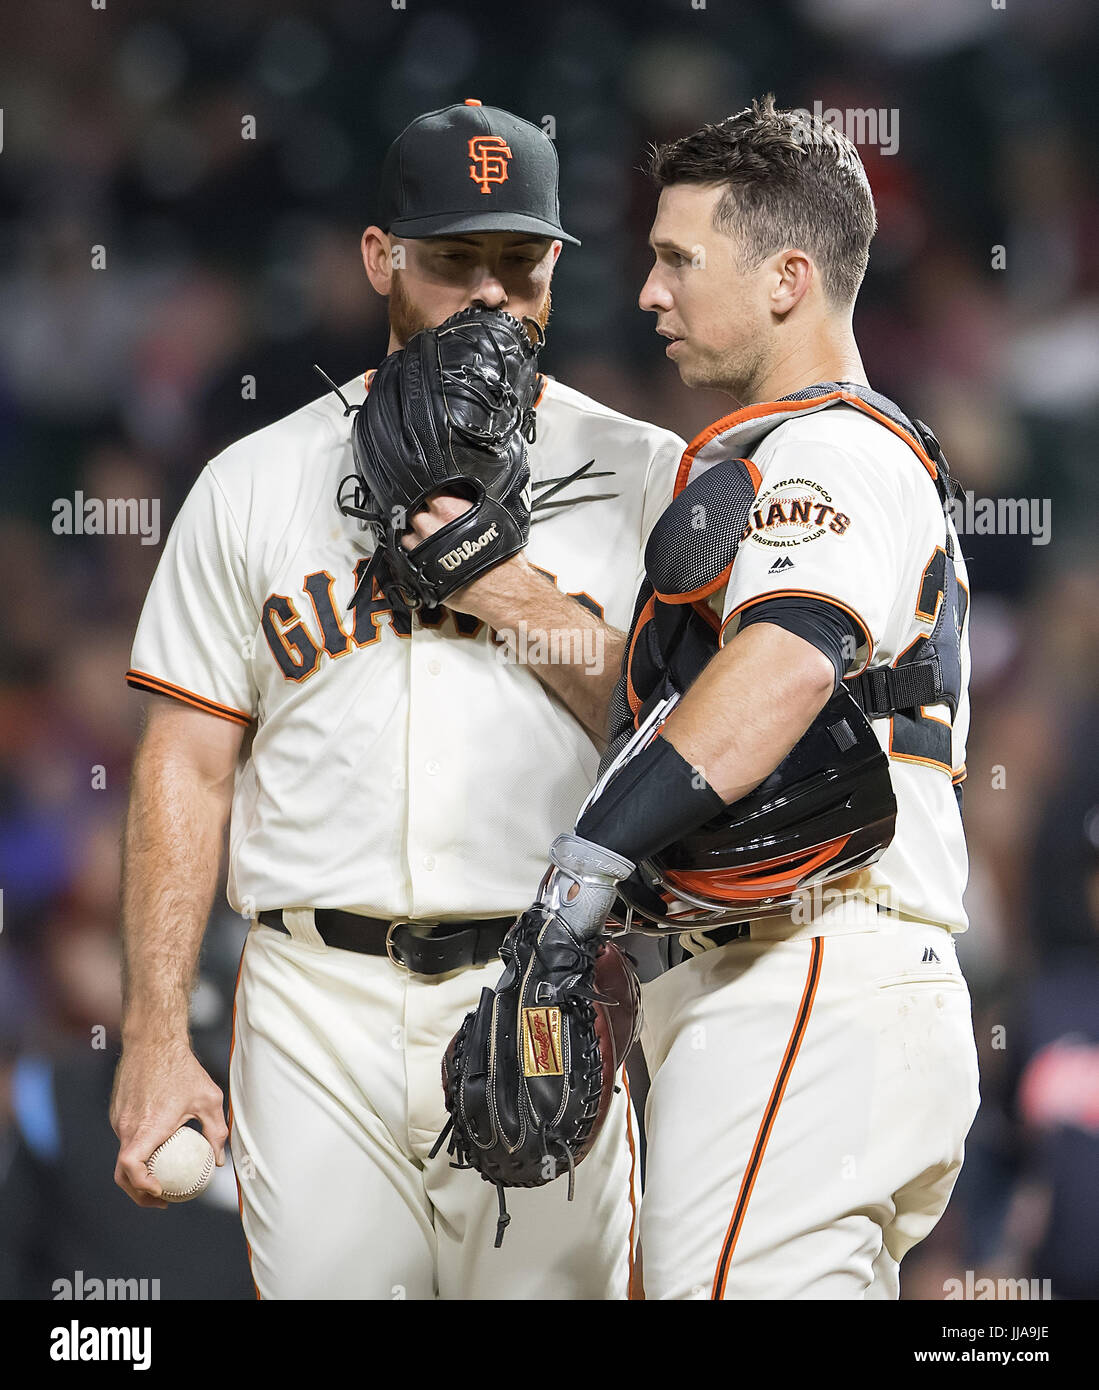 San Francisco, California, USA. 18th July, 2017. San Francisco Giants catcher Buster Posey (28) talks with San Francisco Giants relief pitcher Sam Dyson (49) after walking the first batter in the ninth inning, during a MLB baseball game between the Cleveland Indians and the San Francisco Giants at AT&T Park in San Francisco, California. Valerie Shoaps/CSM/Alamy Live News Stock Photo